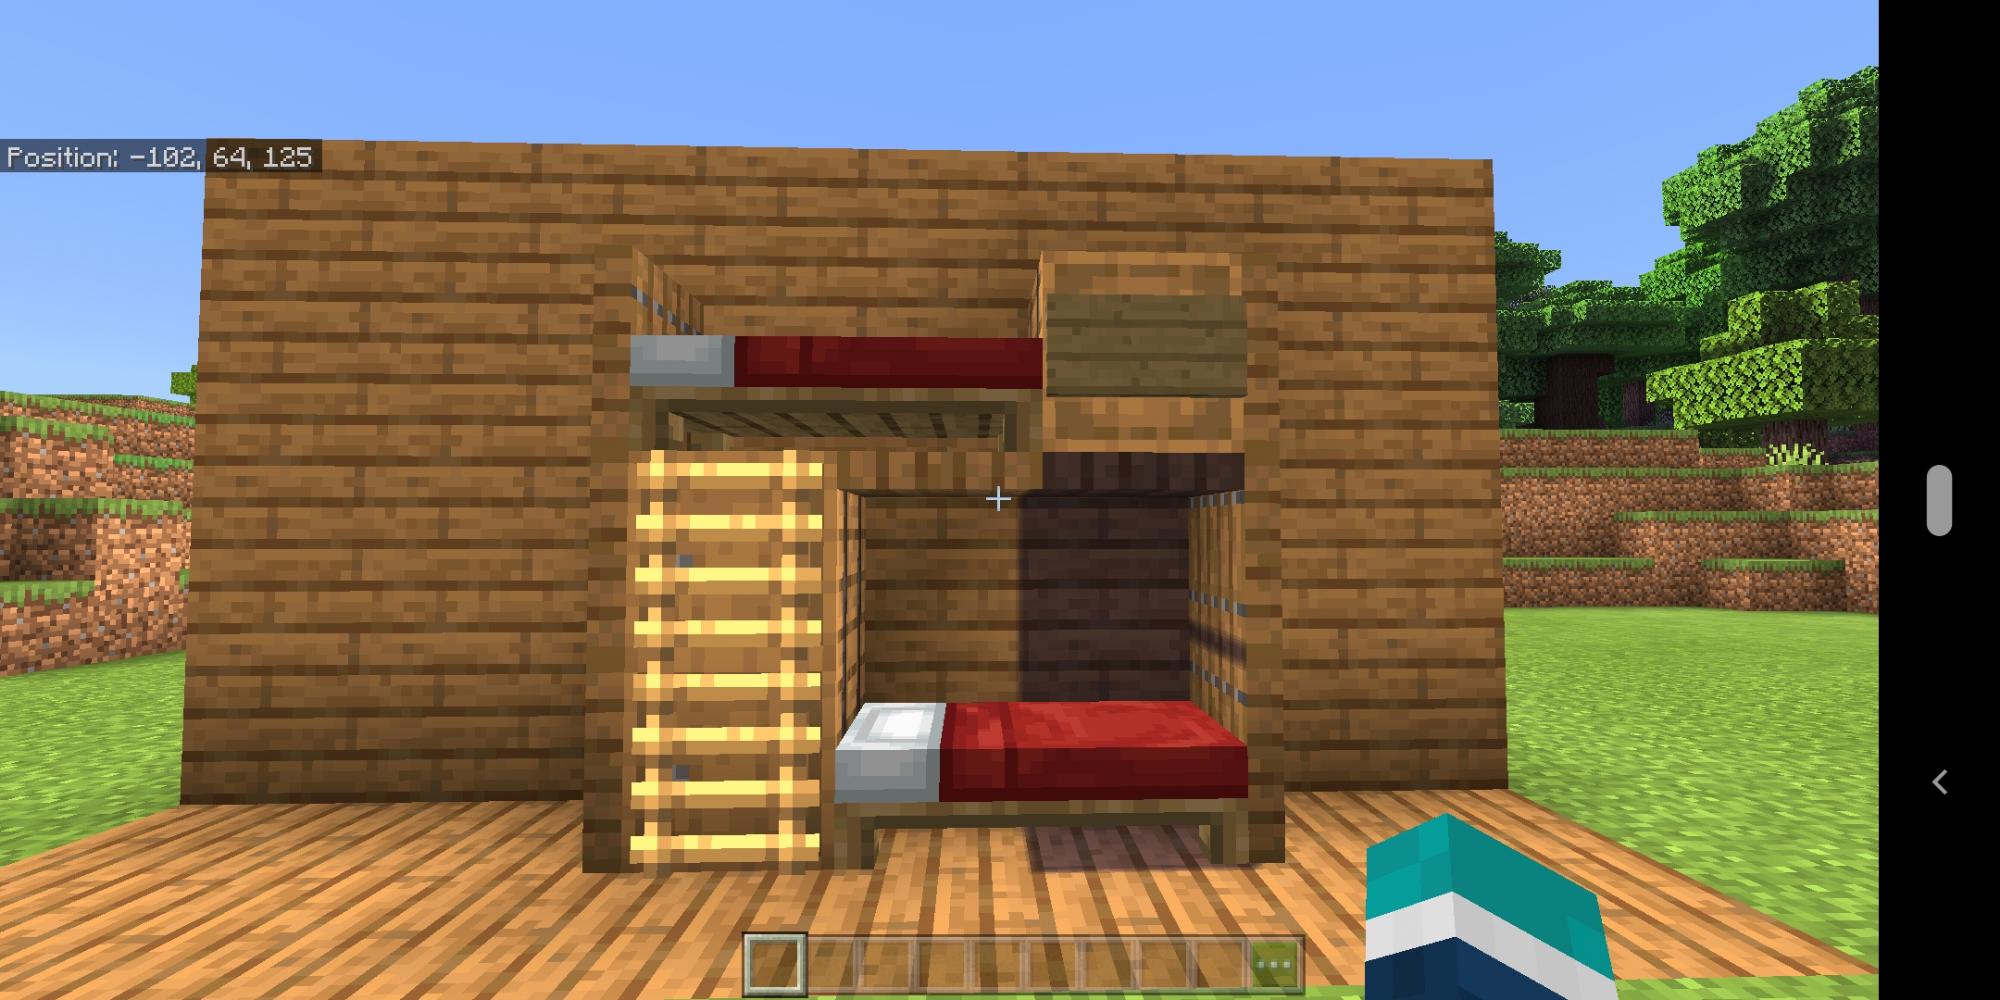 This Bunk Bed I Made Fandom, How To Make Bunk Beds On Minecraft